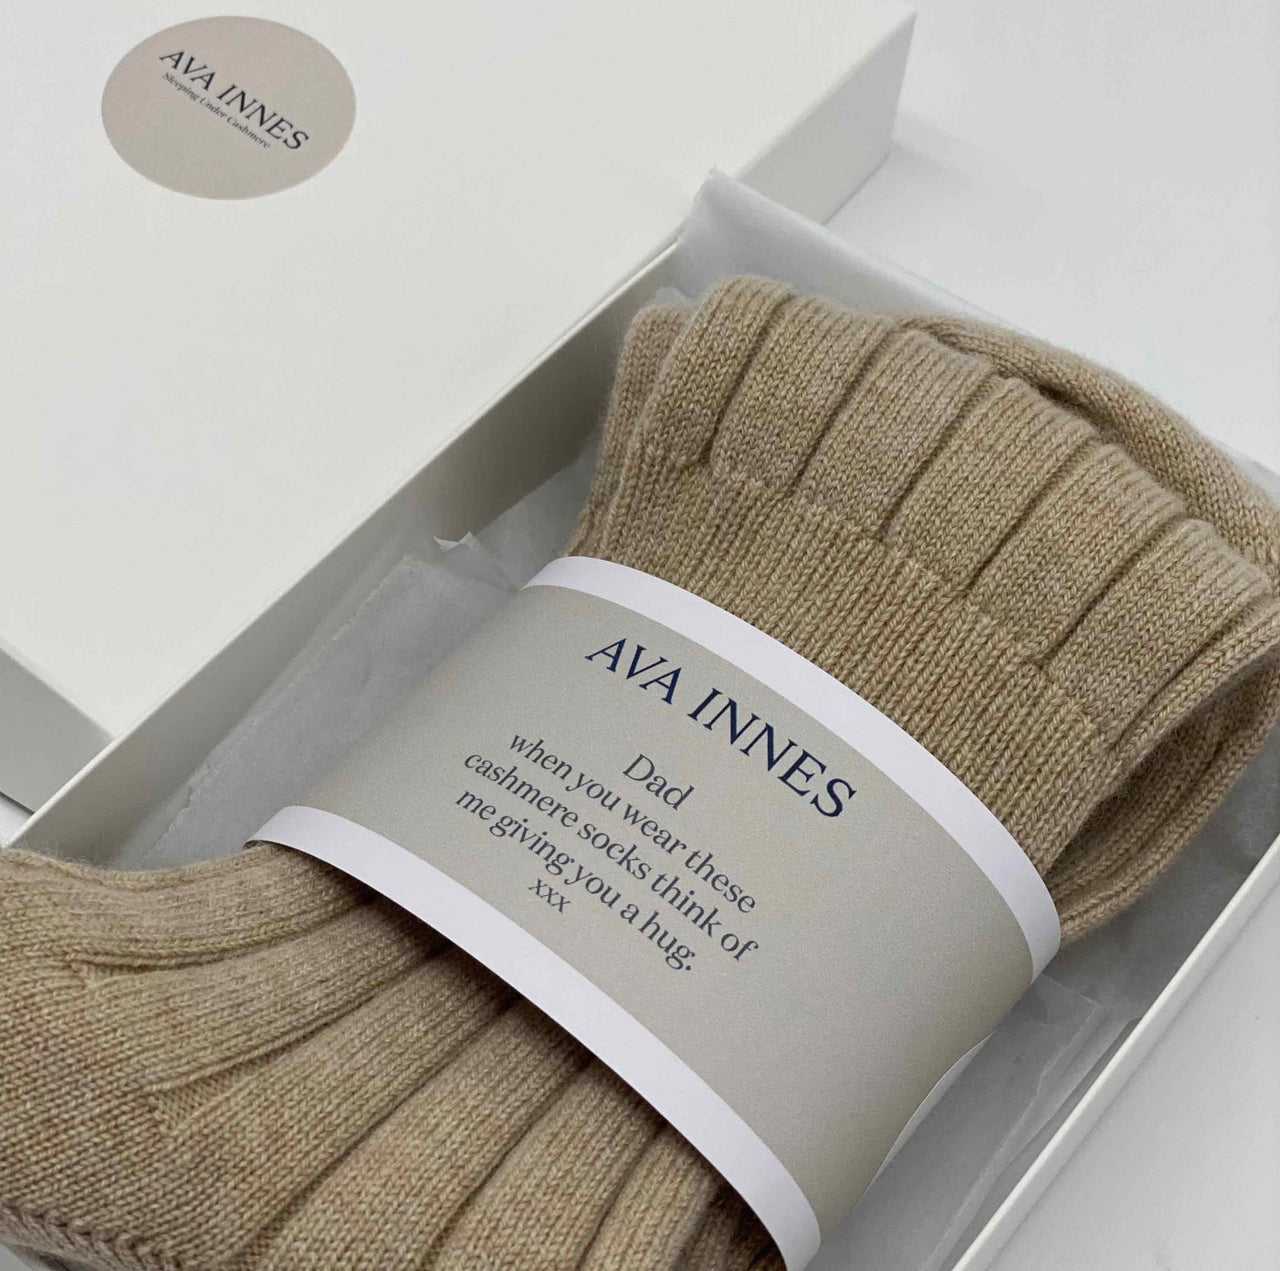 Men's Natural Luxury Ribbed Cashmere Socks - Made Scotland